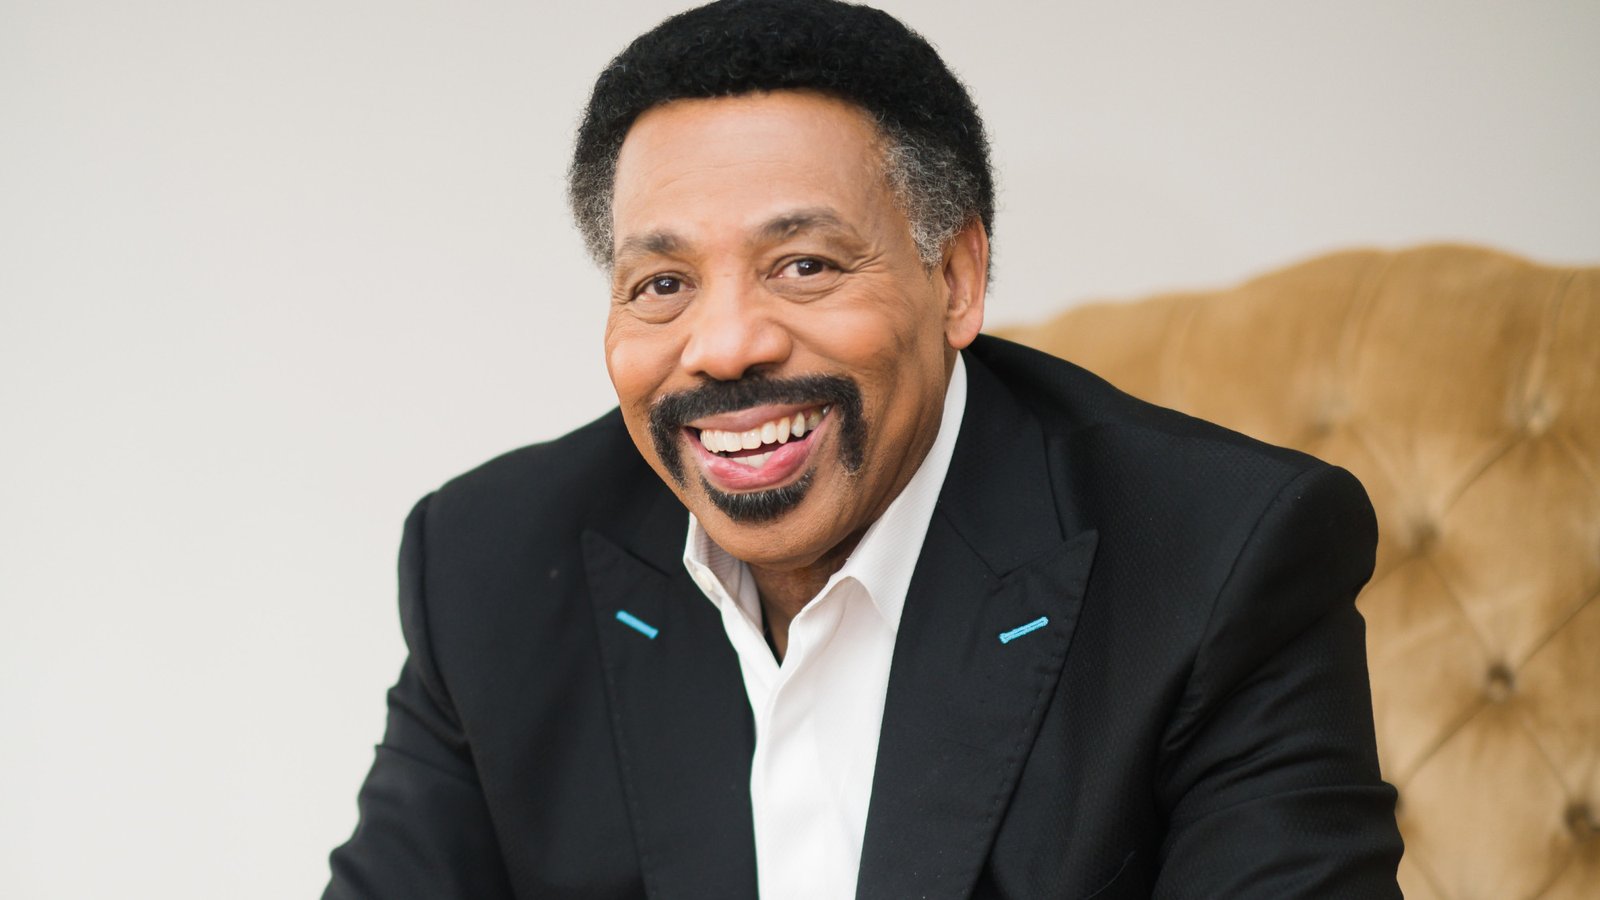 Dr. Tony Evans falls short of the high standards of scripture decides to steps down